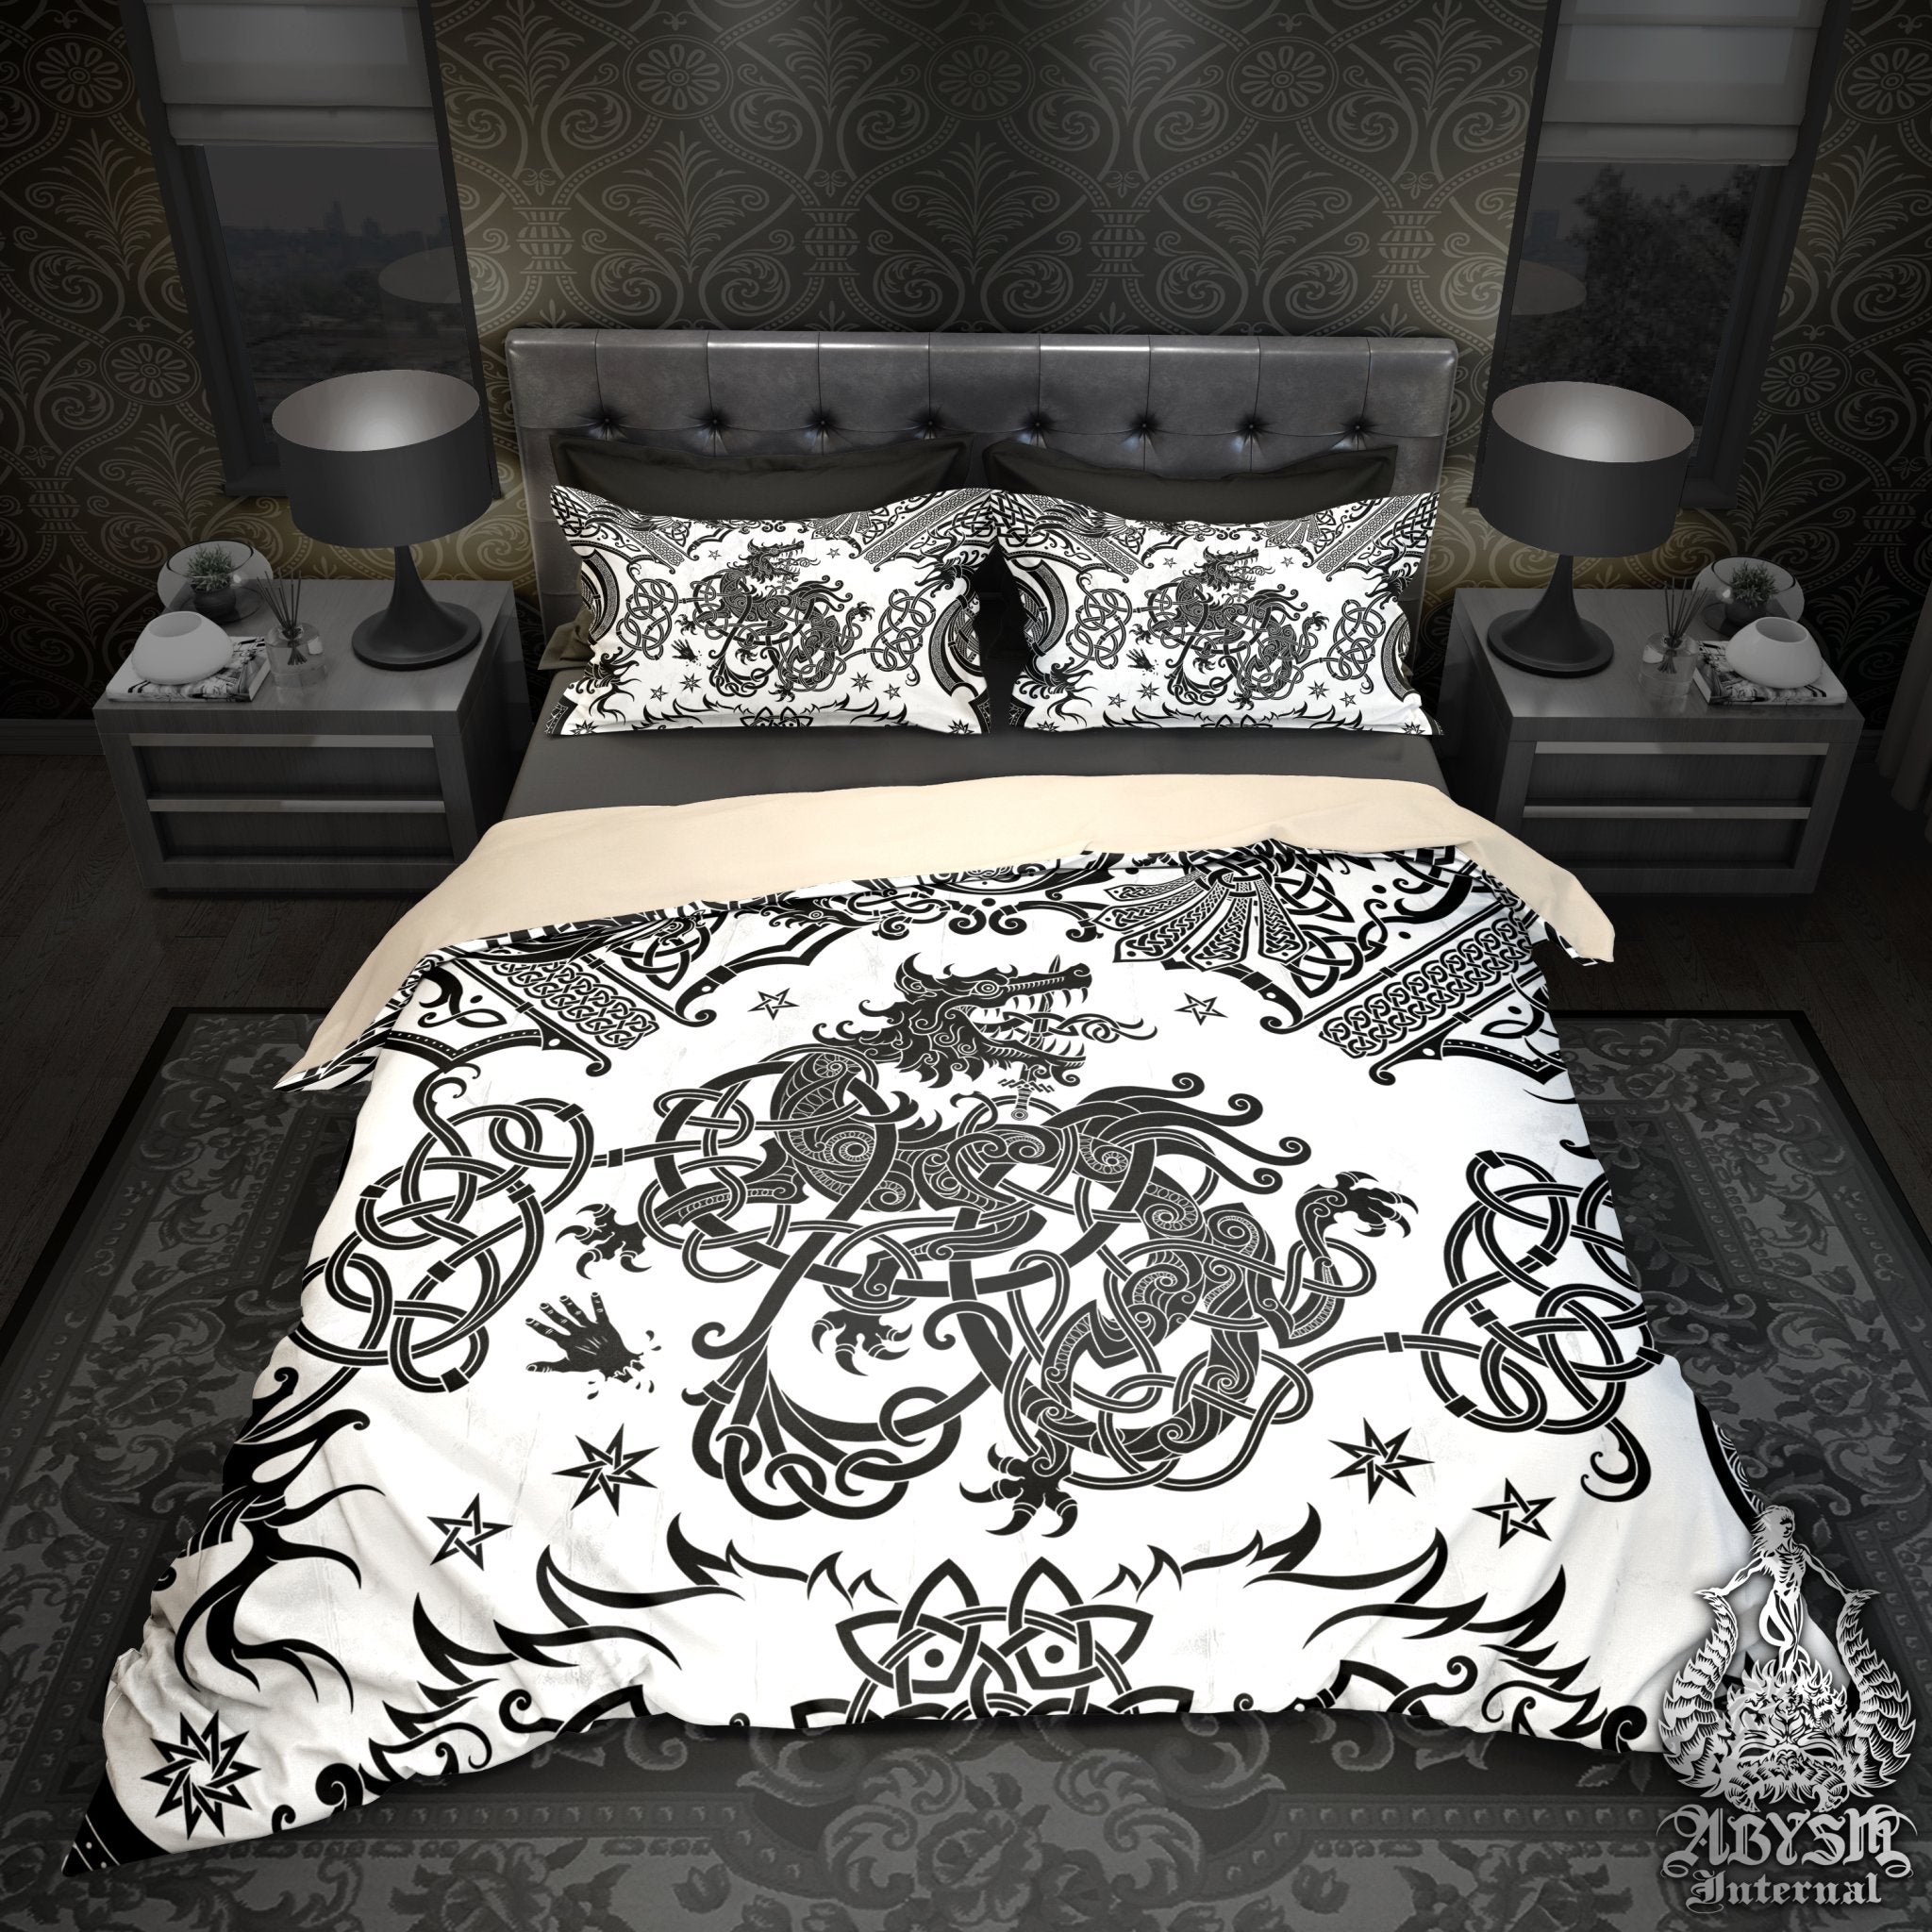 Fenrir Bedding Set, Comforter or Duvet, Viking Bed Cover and Bedroom Decor, Norse Wolf Art Print, King, Queen & Twin Size - Black and White - Abysm Internal